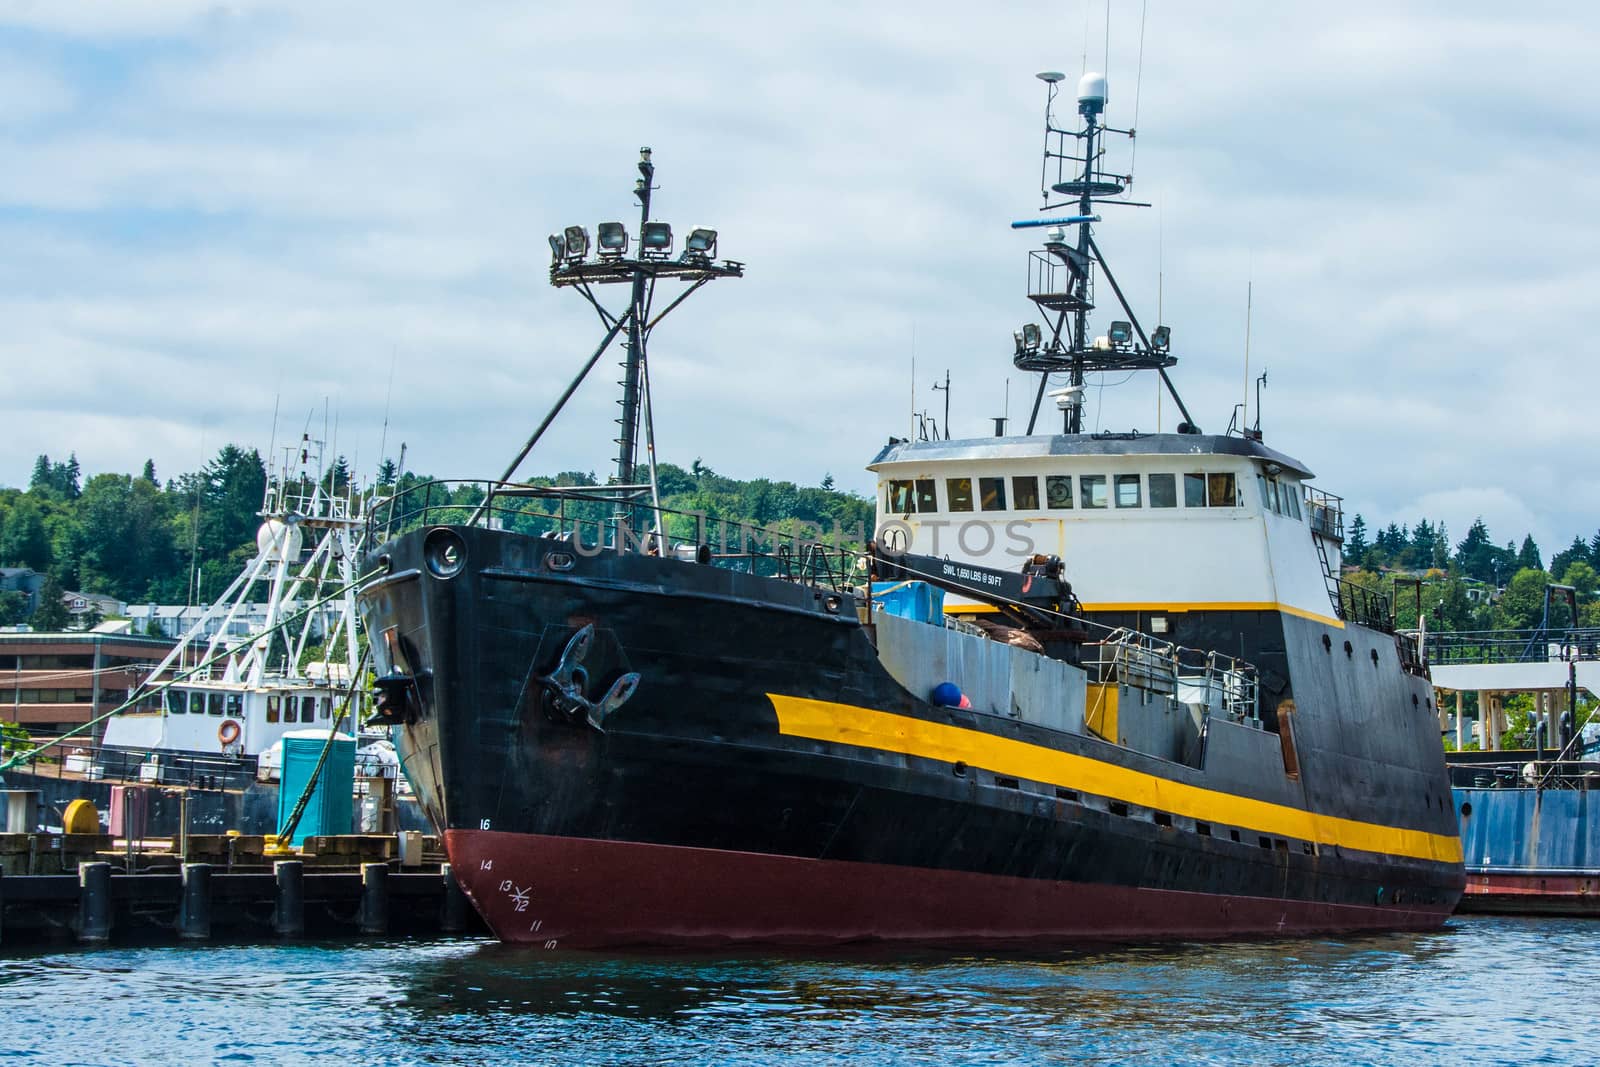 Alaska fishing vessel at the pier during the off season